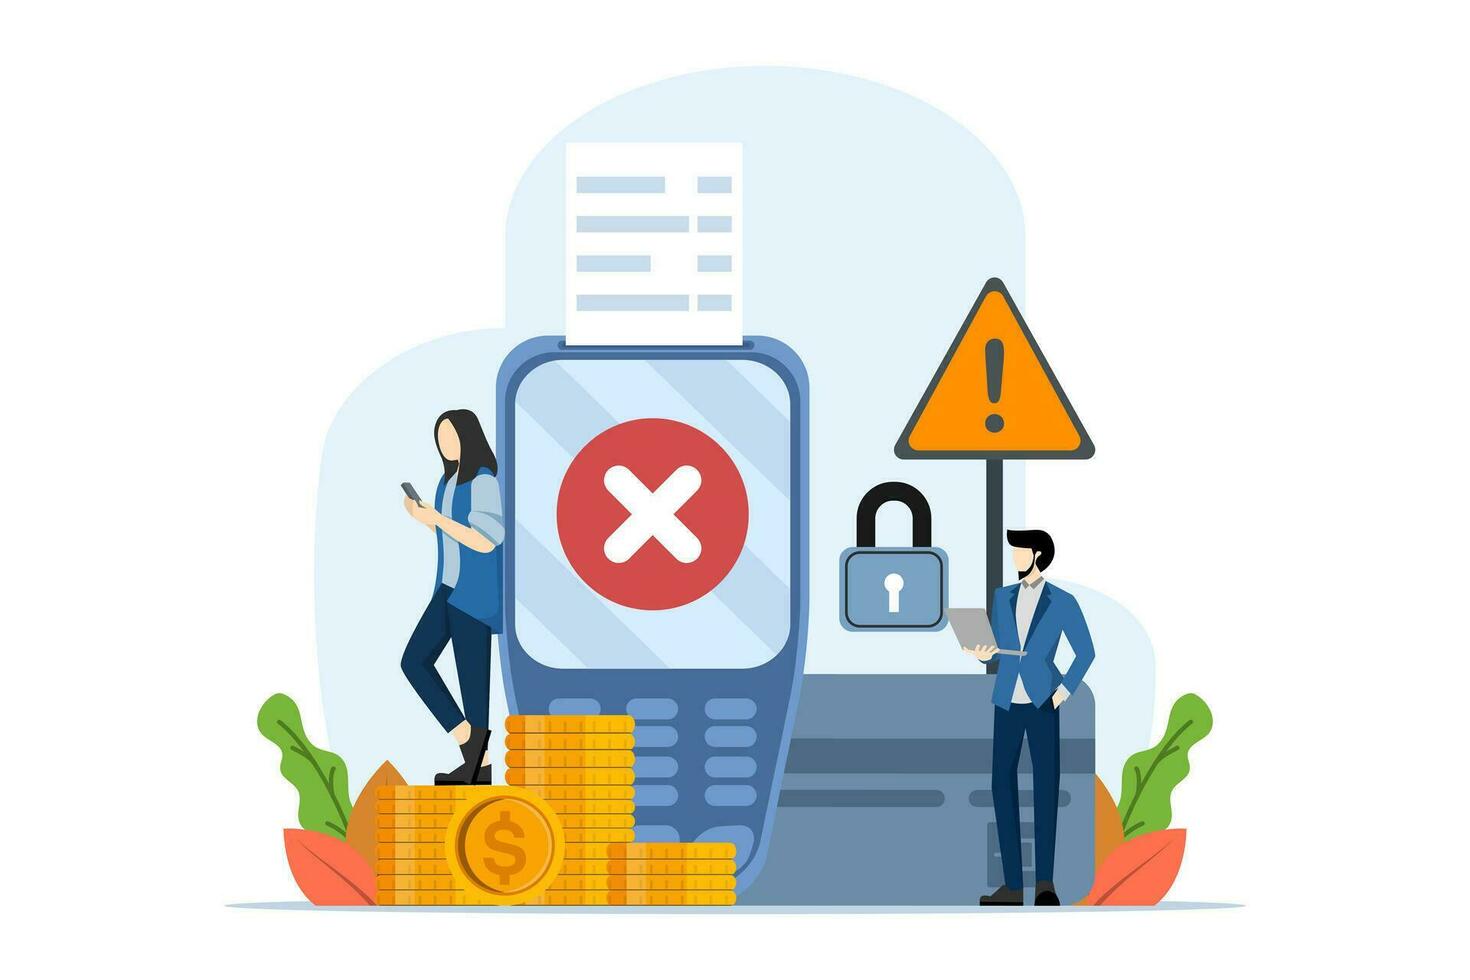 Payment error concept. Non-cash NFC payment transaction cancelled. Payment terminal with cross check mark. Payment failed, try again. Vector illustration on white background